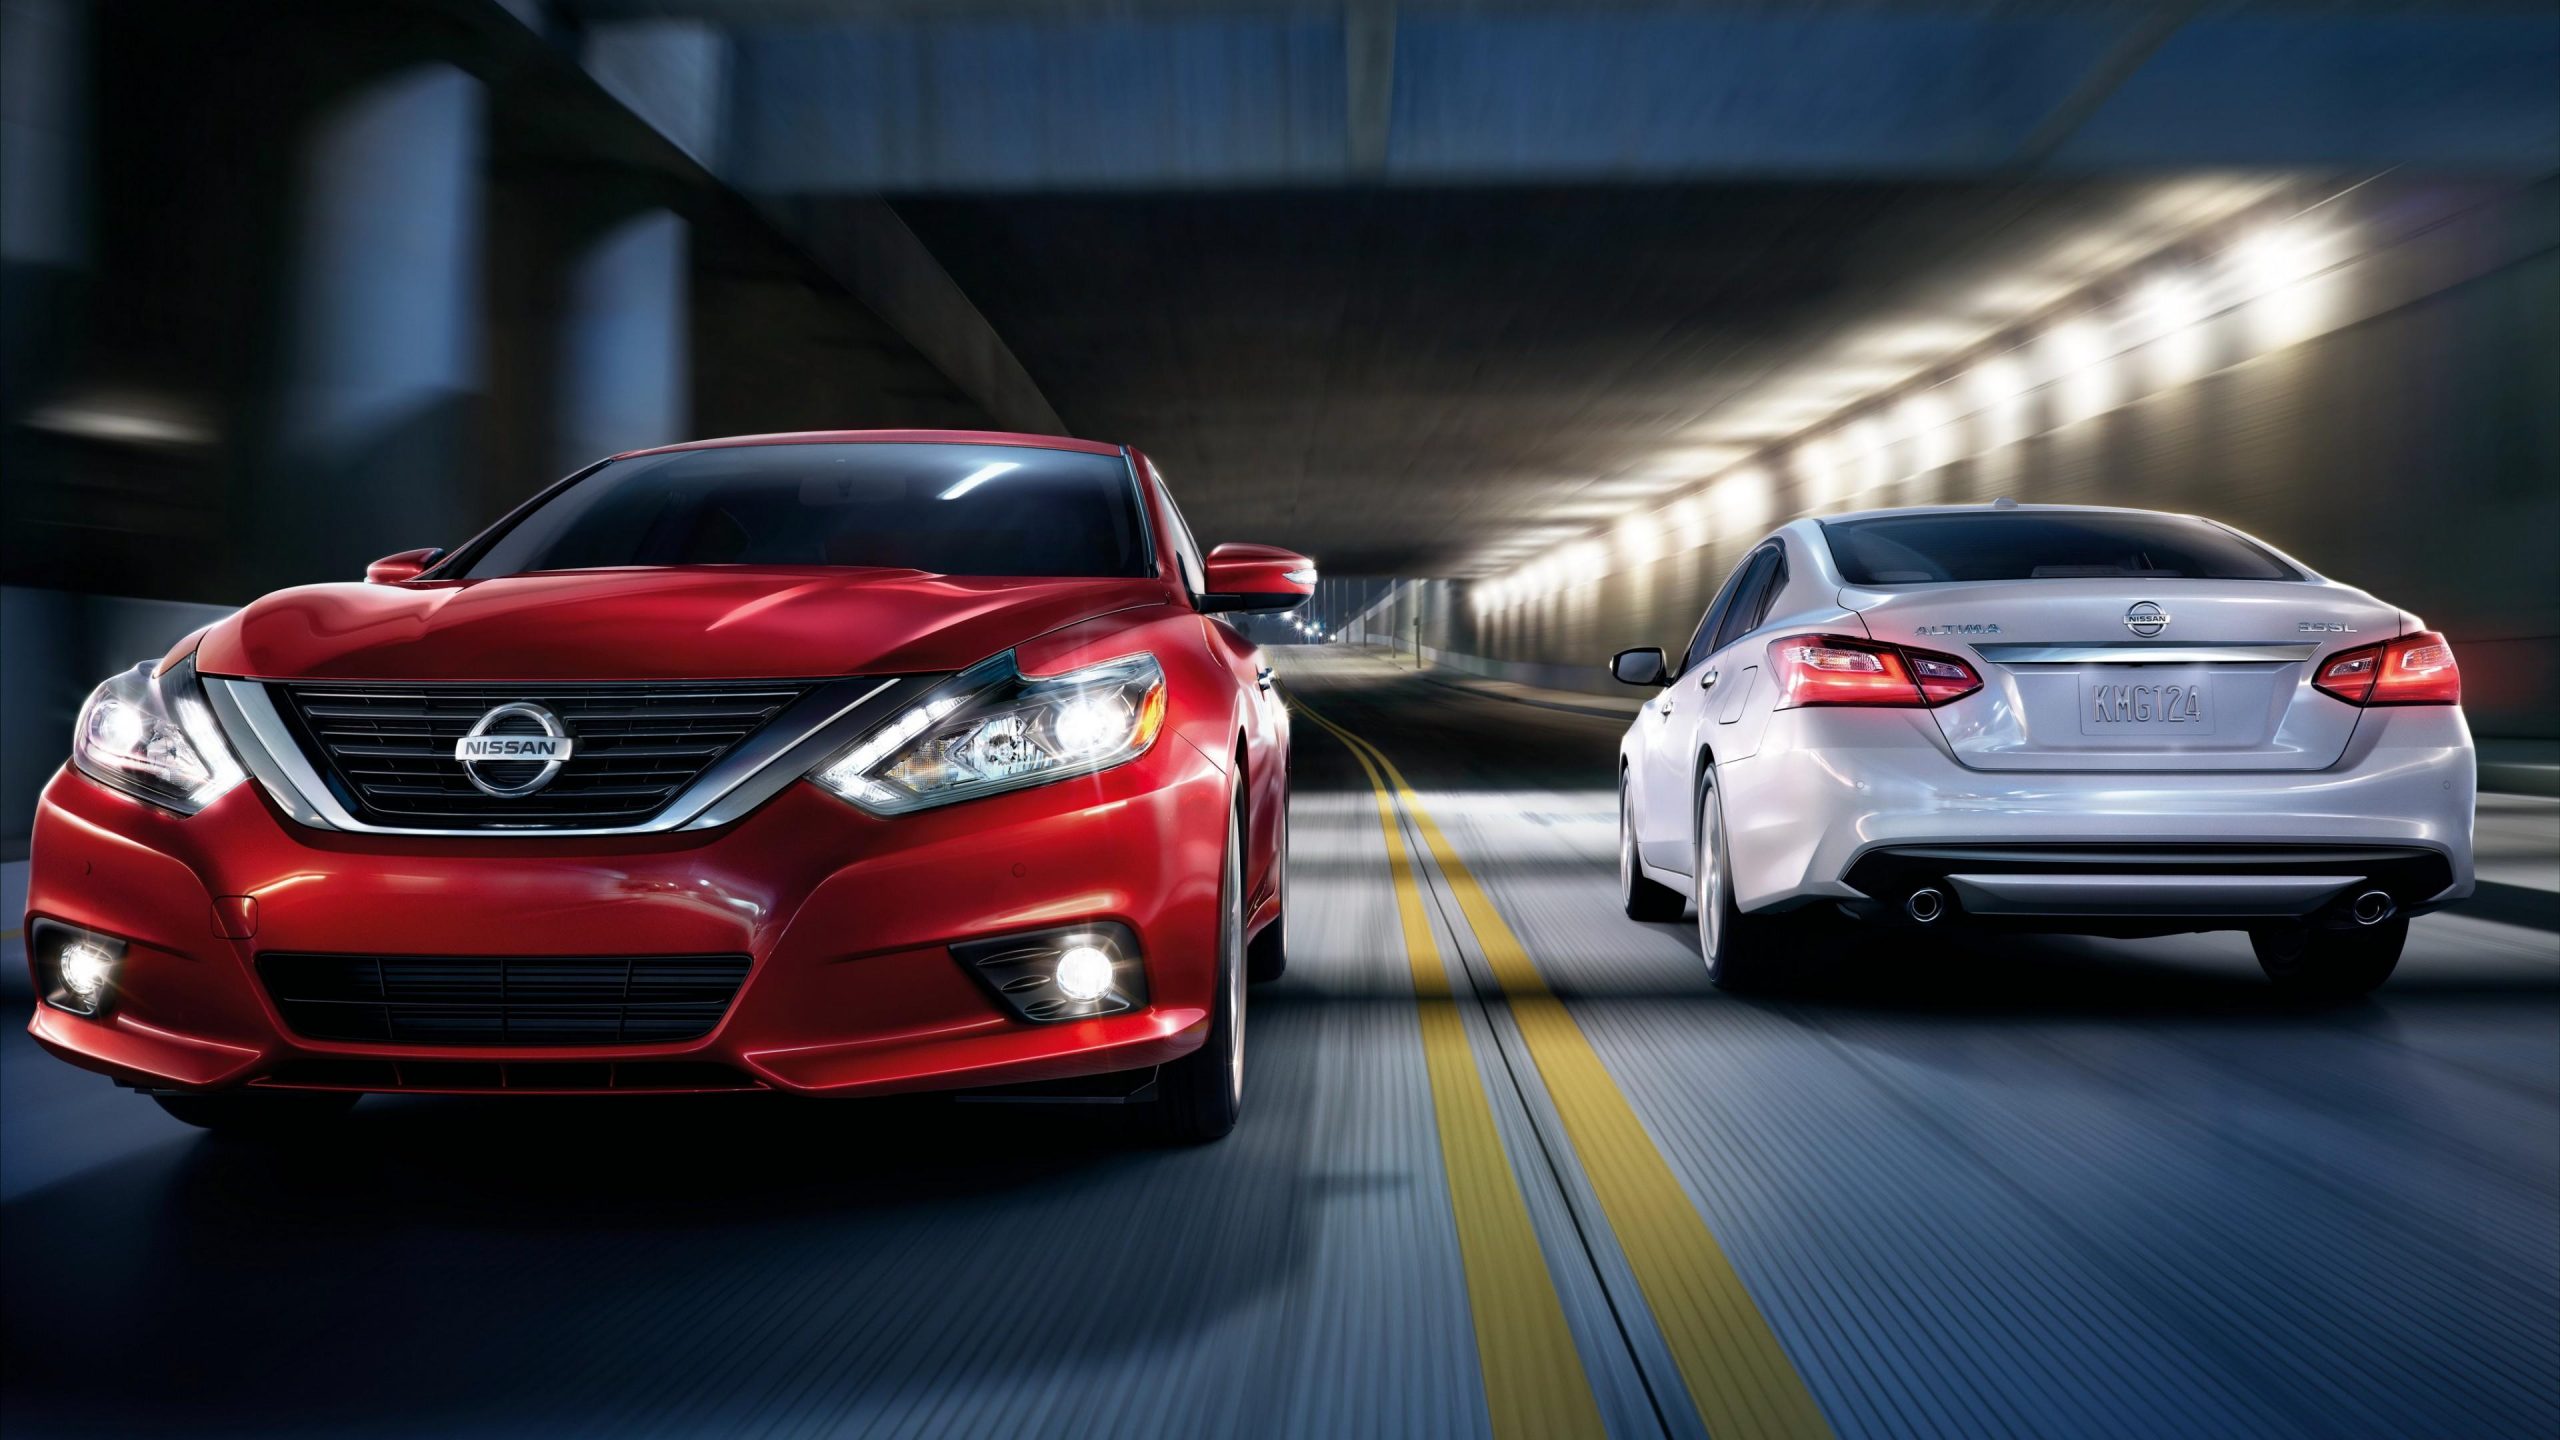 Nissan altima hd free 2020 wallpapers